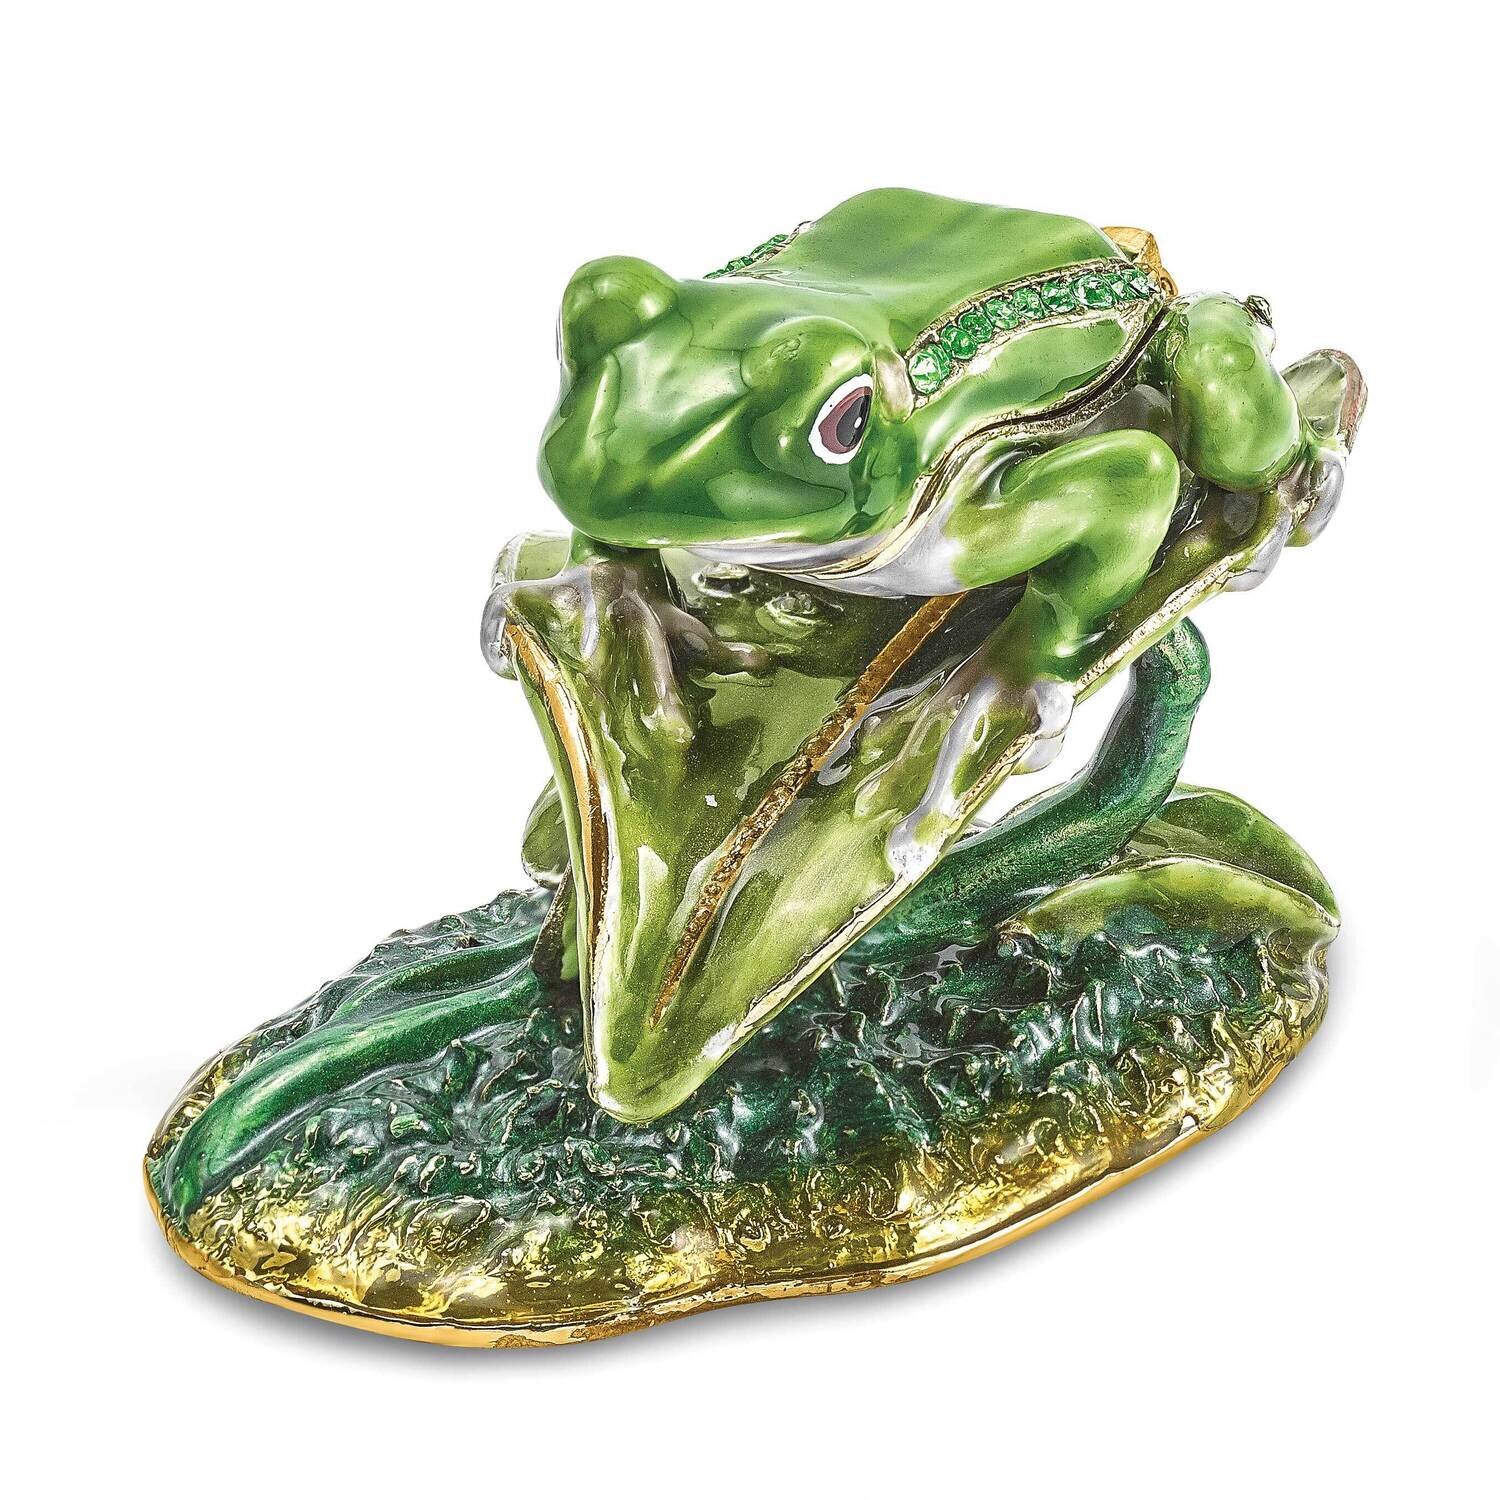 Lilly Frog On Lily Pad Trinket Box Bejeweled BJ4075